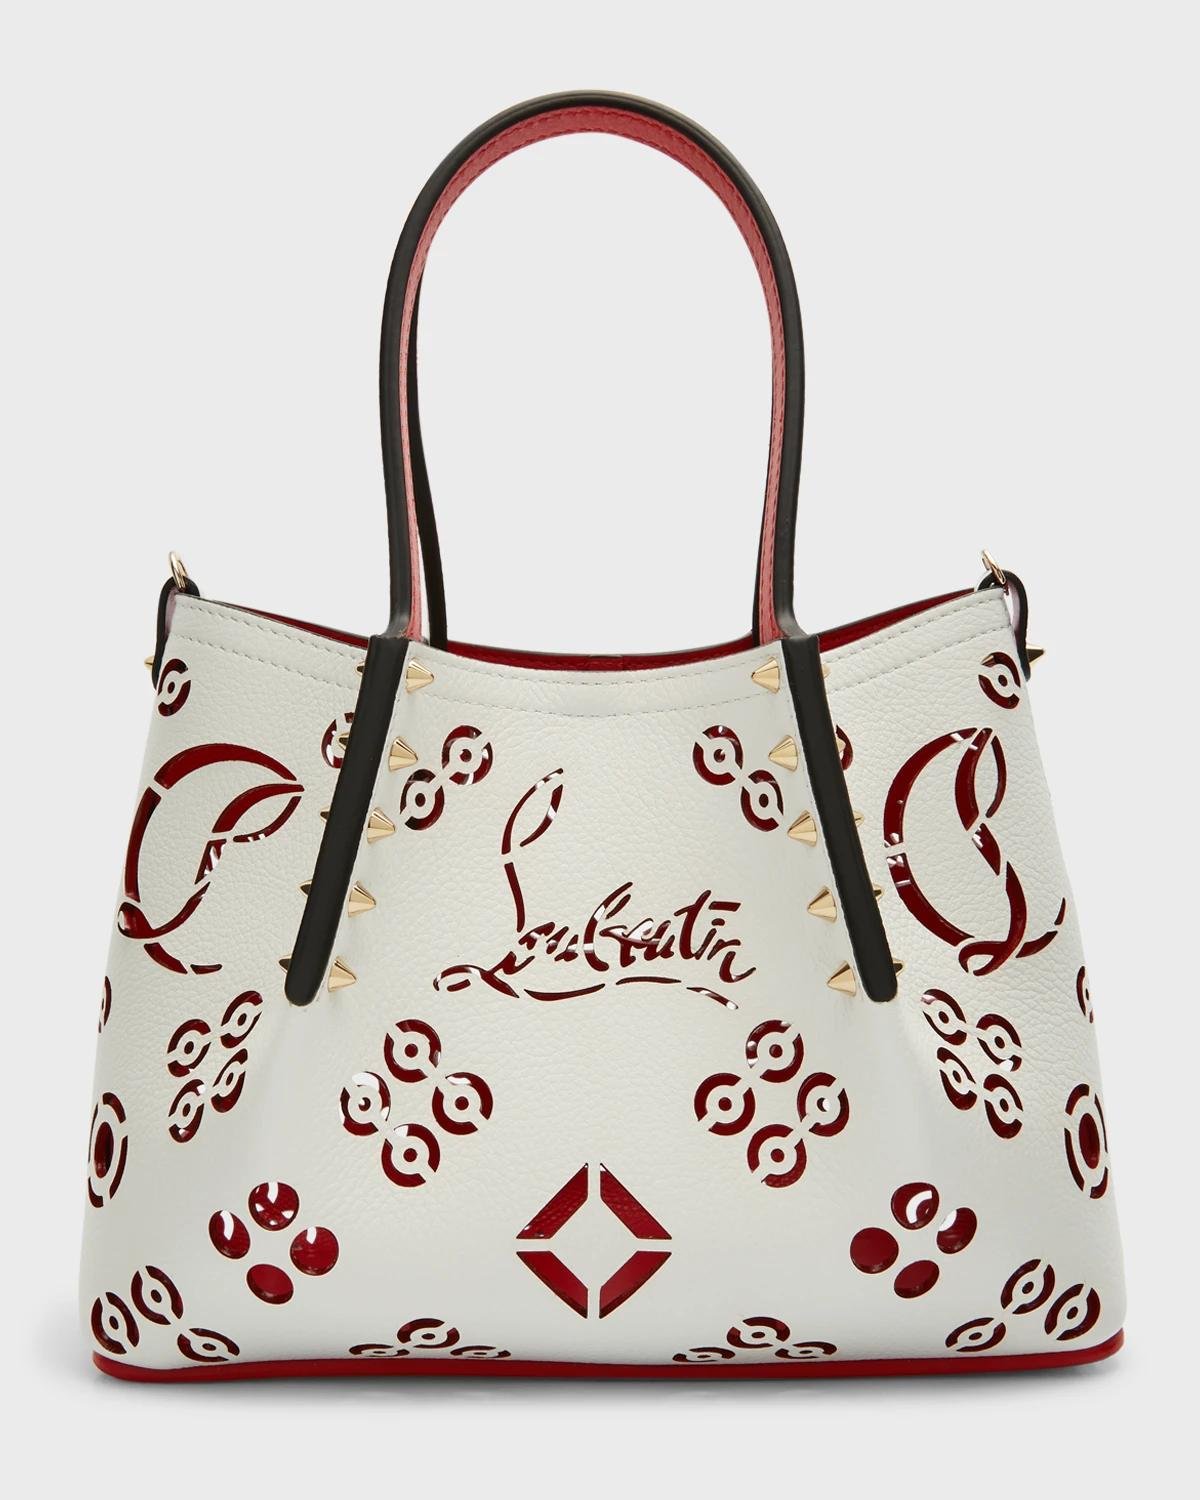 Cabarock Mini Perforated Loubinthesky Tote Bag by CHRISTIAN LOUBOUTIN ...